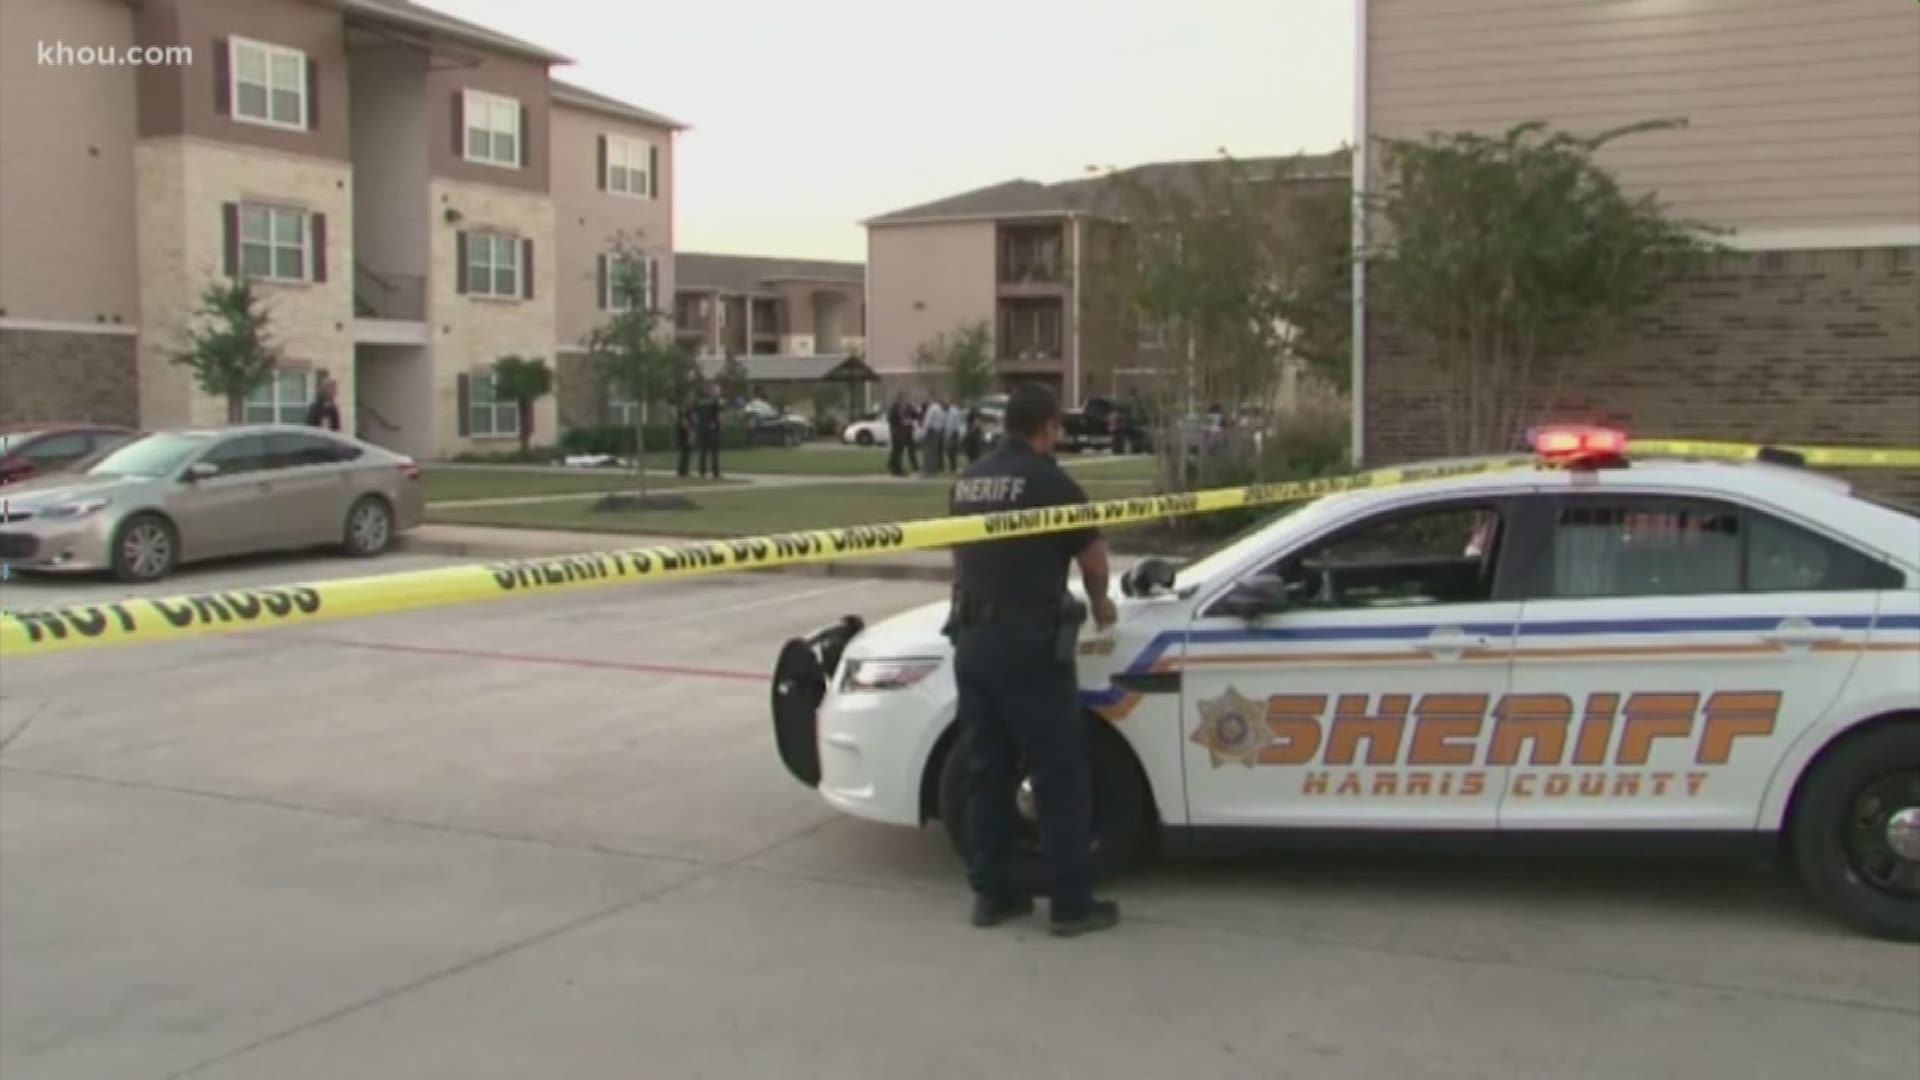 Two people are dead after a shooting in north Harris County.